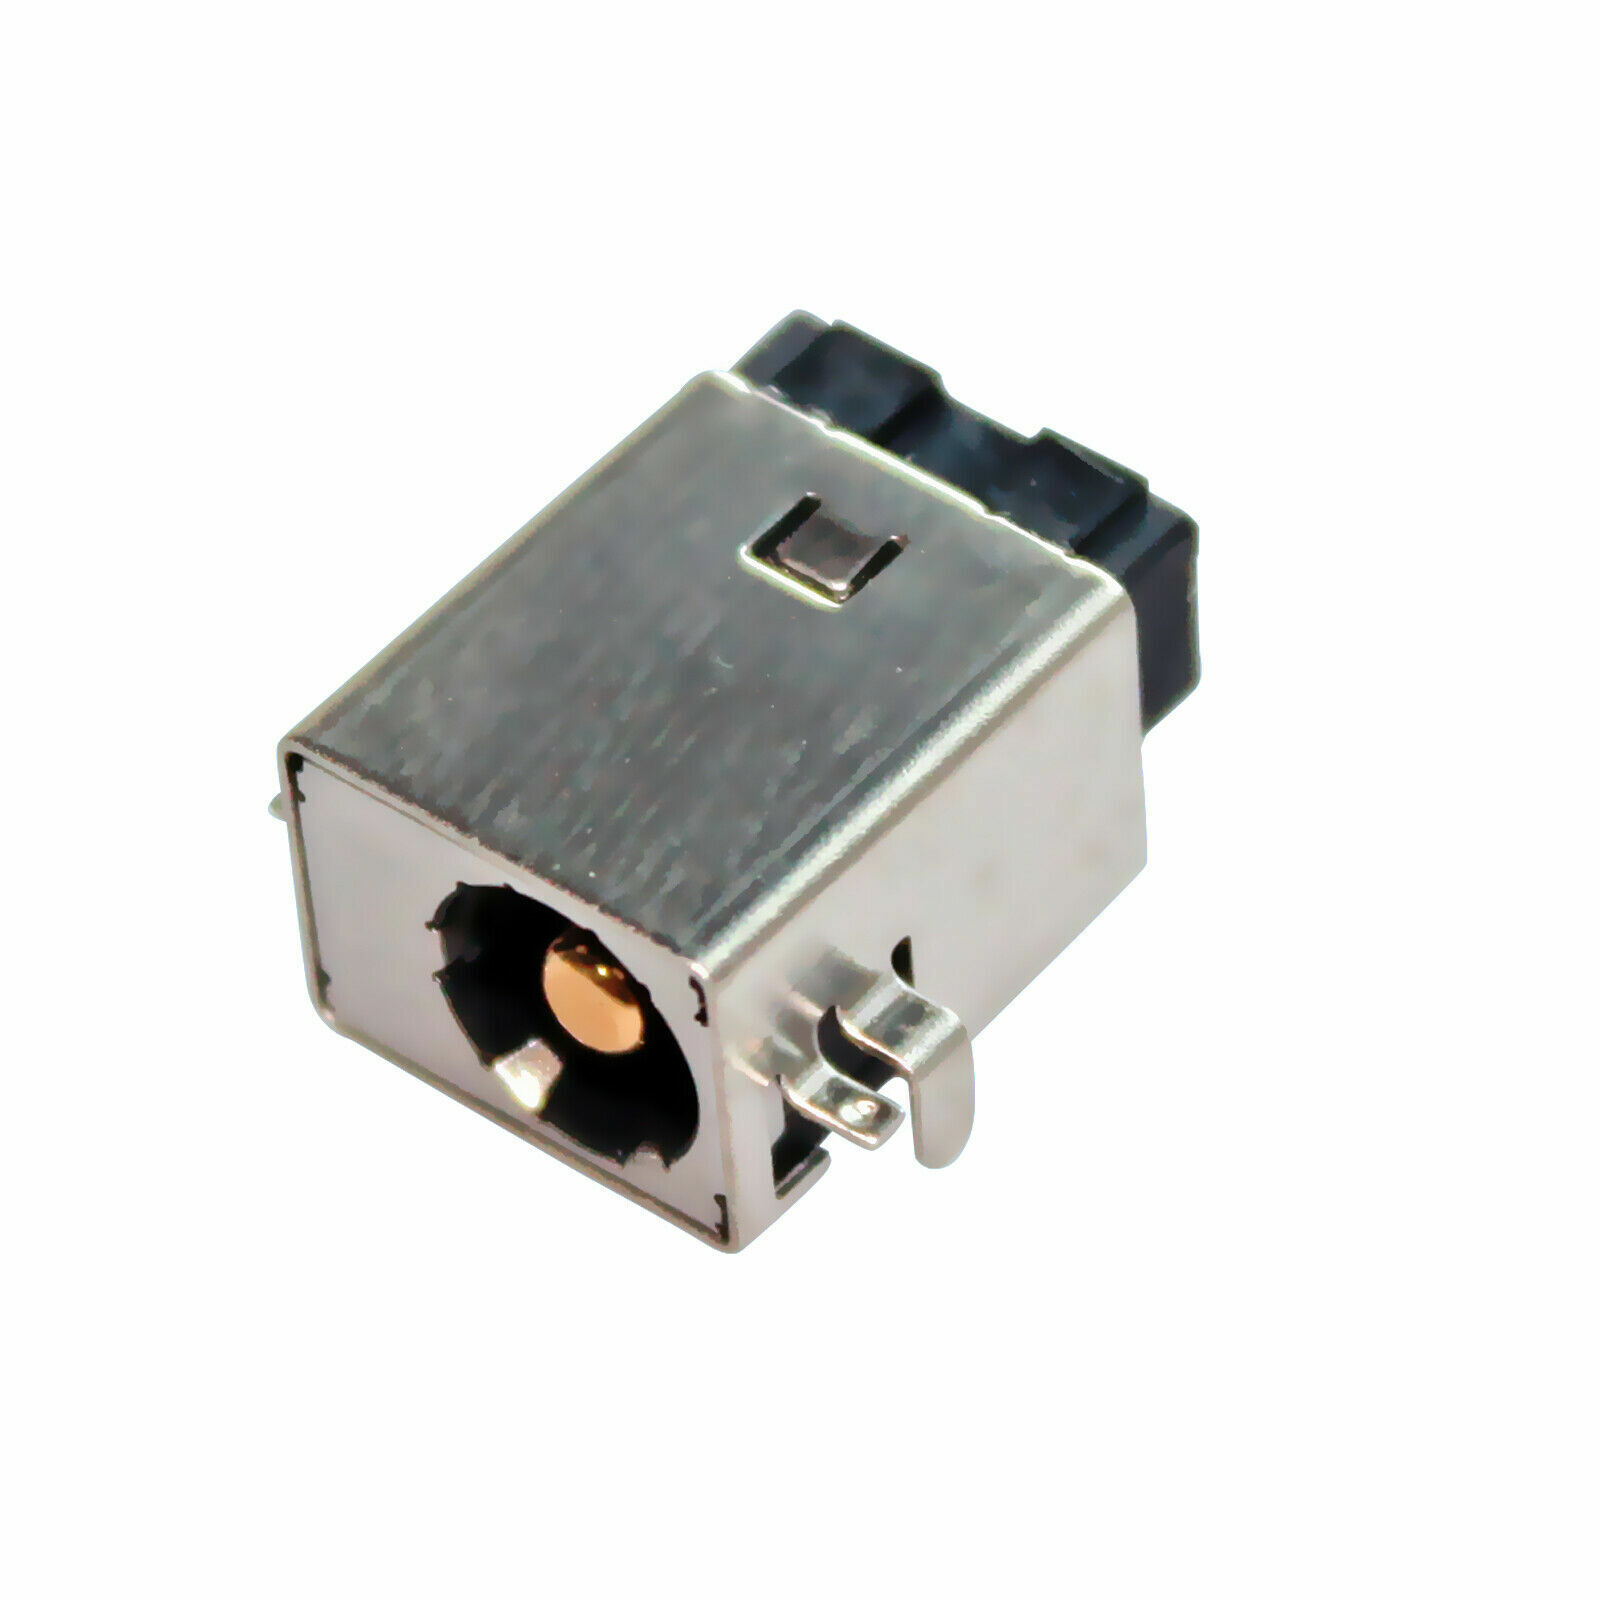 For System76 Oryx Pro orxp1 Laptop DC IN Power Jack Charging Port Connector JUS